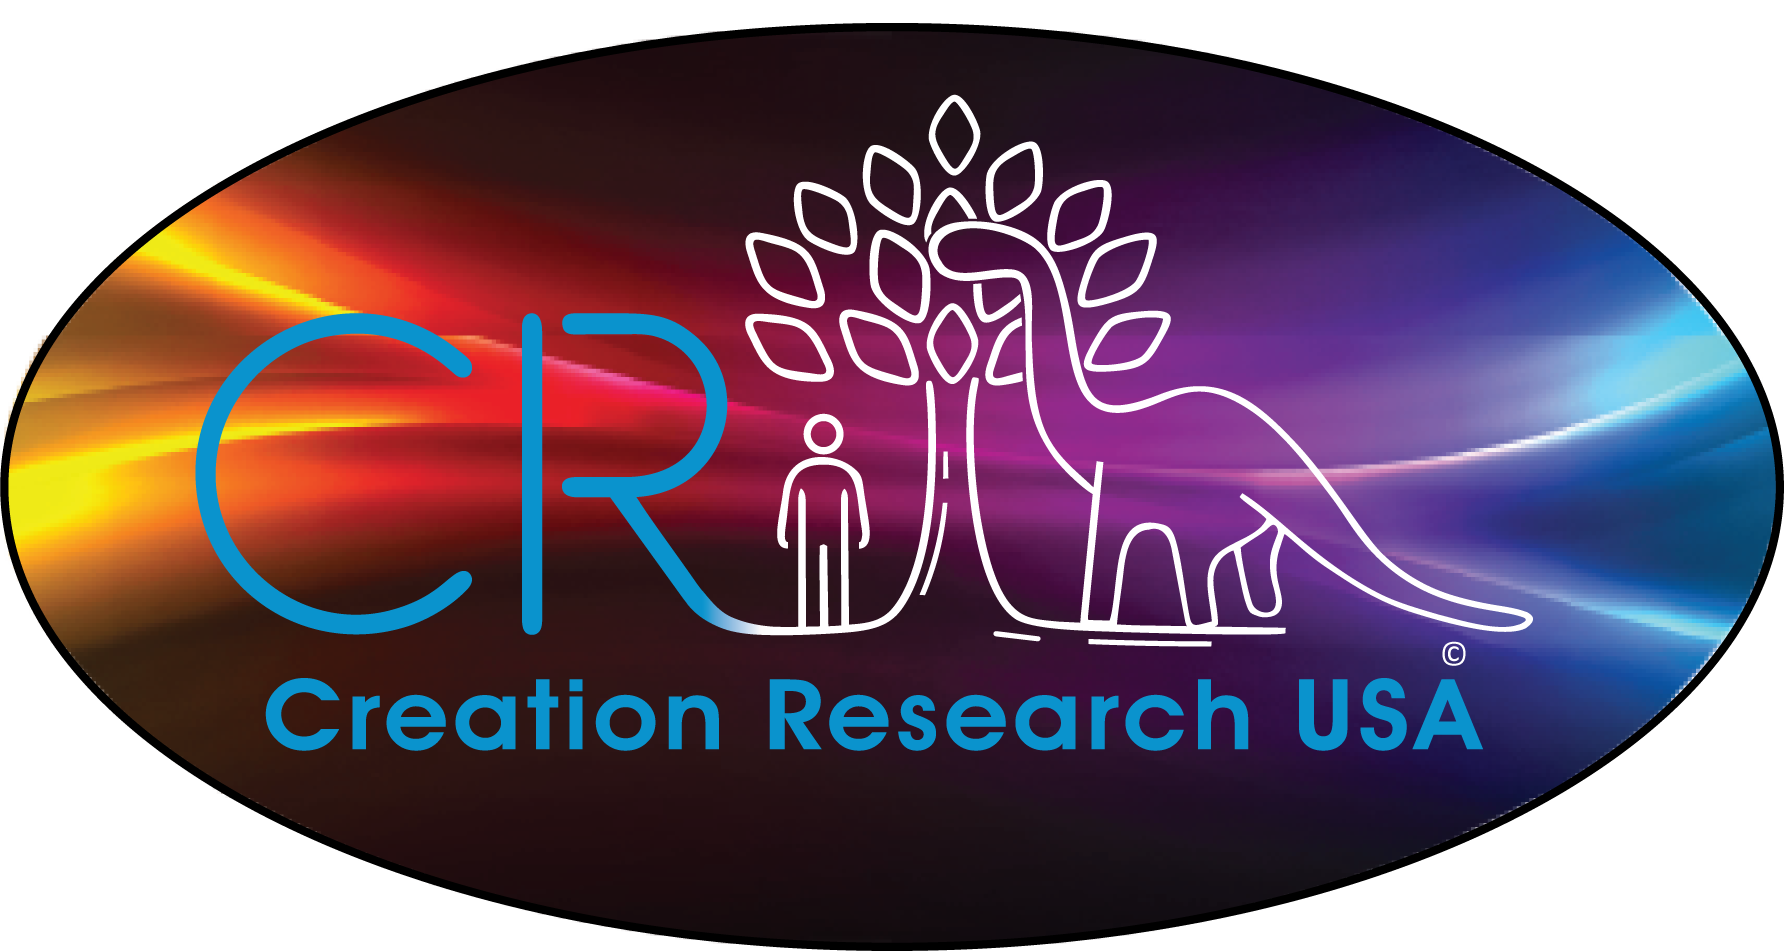 Creation Research USA